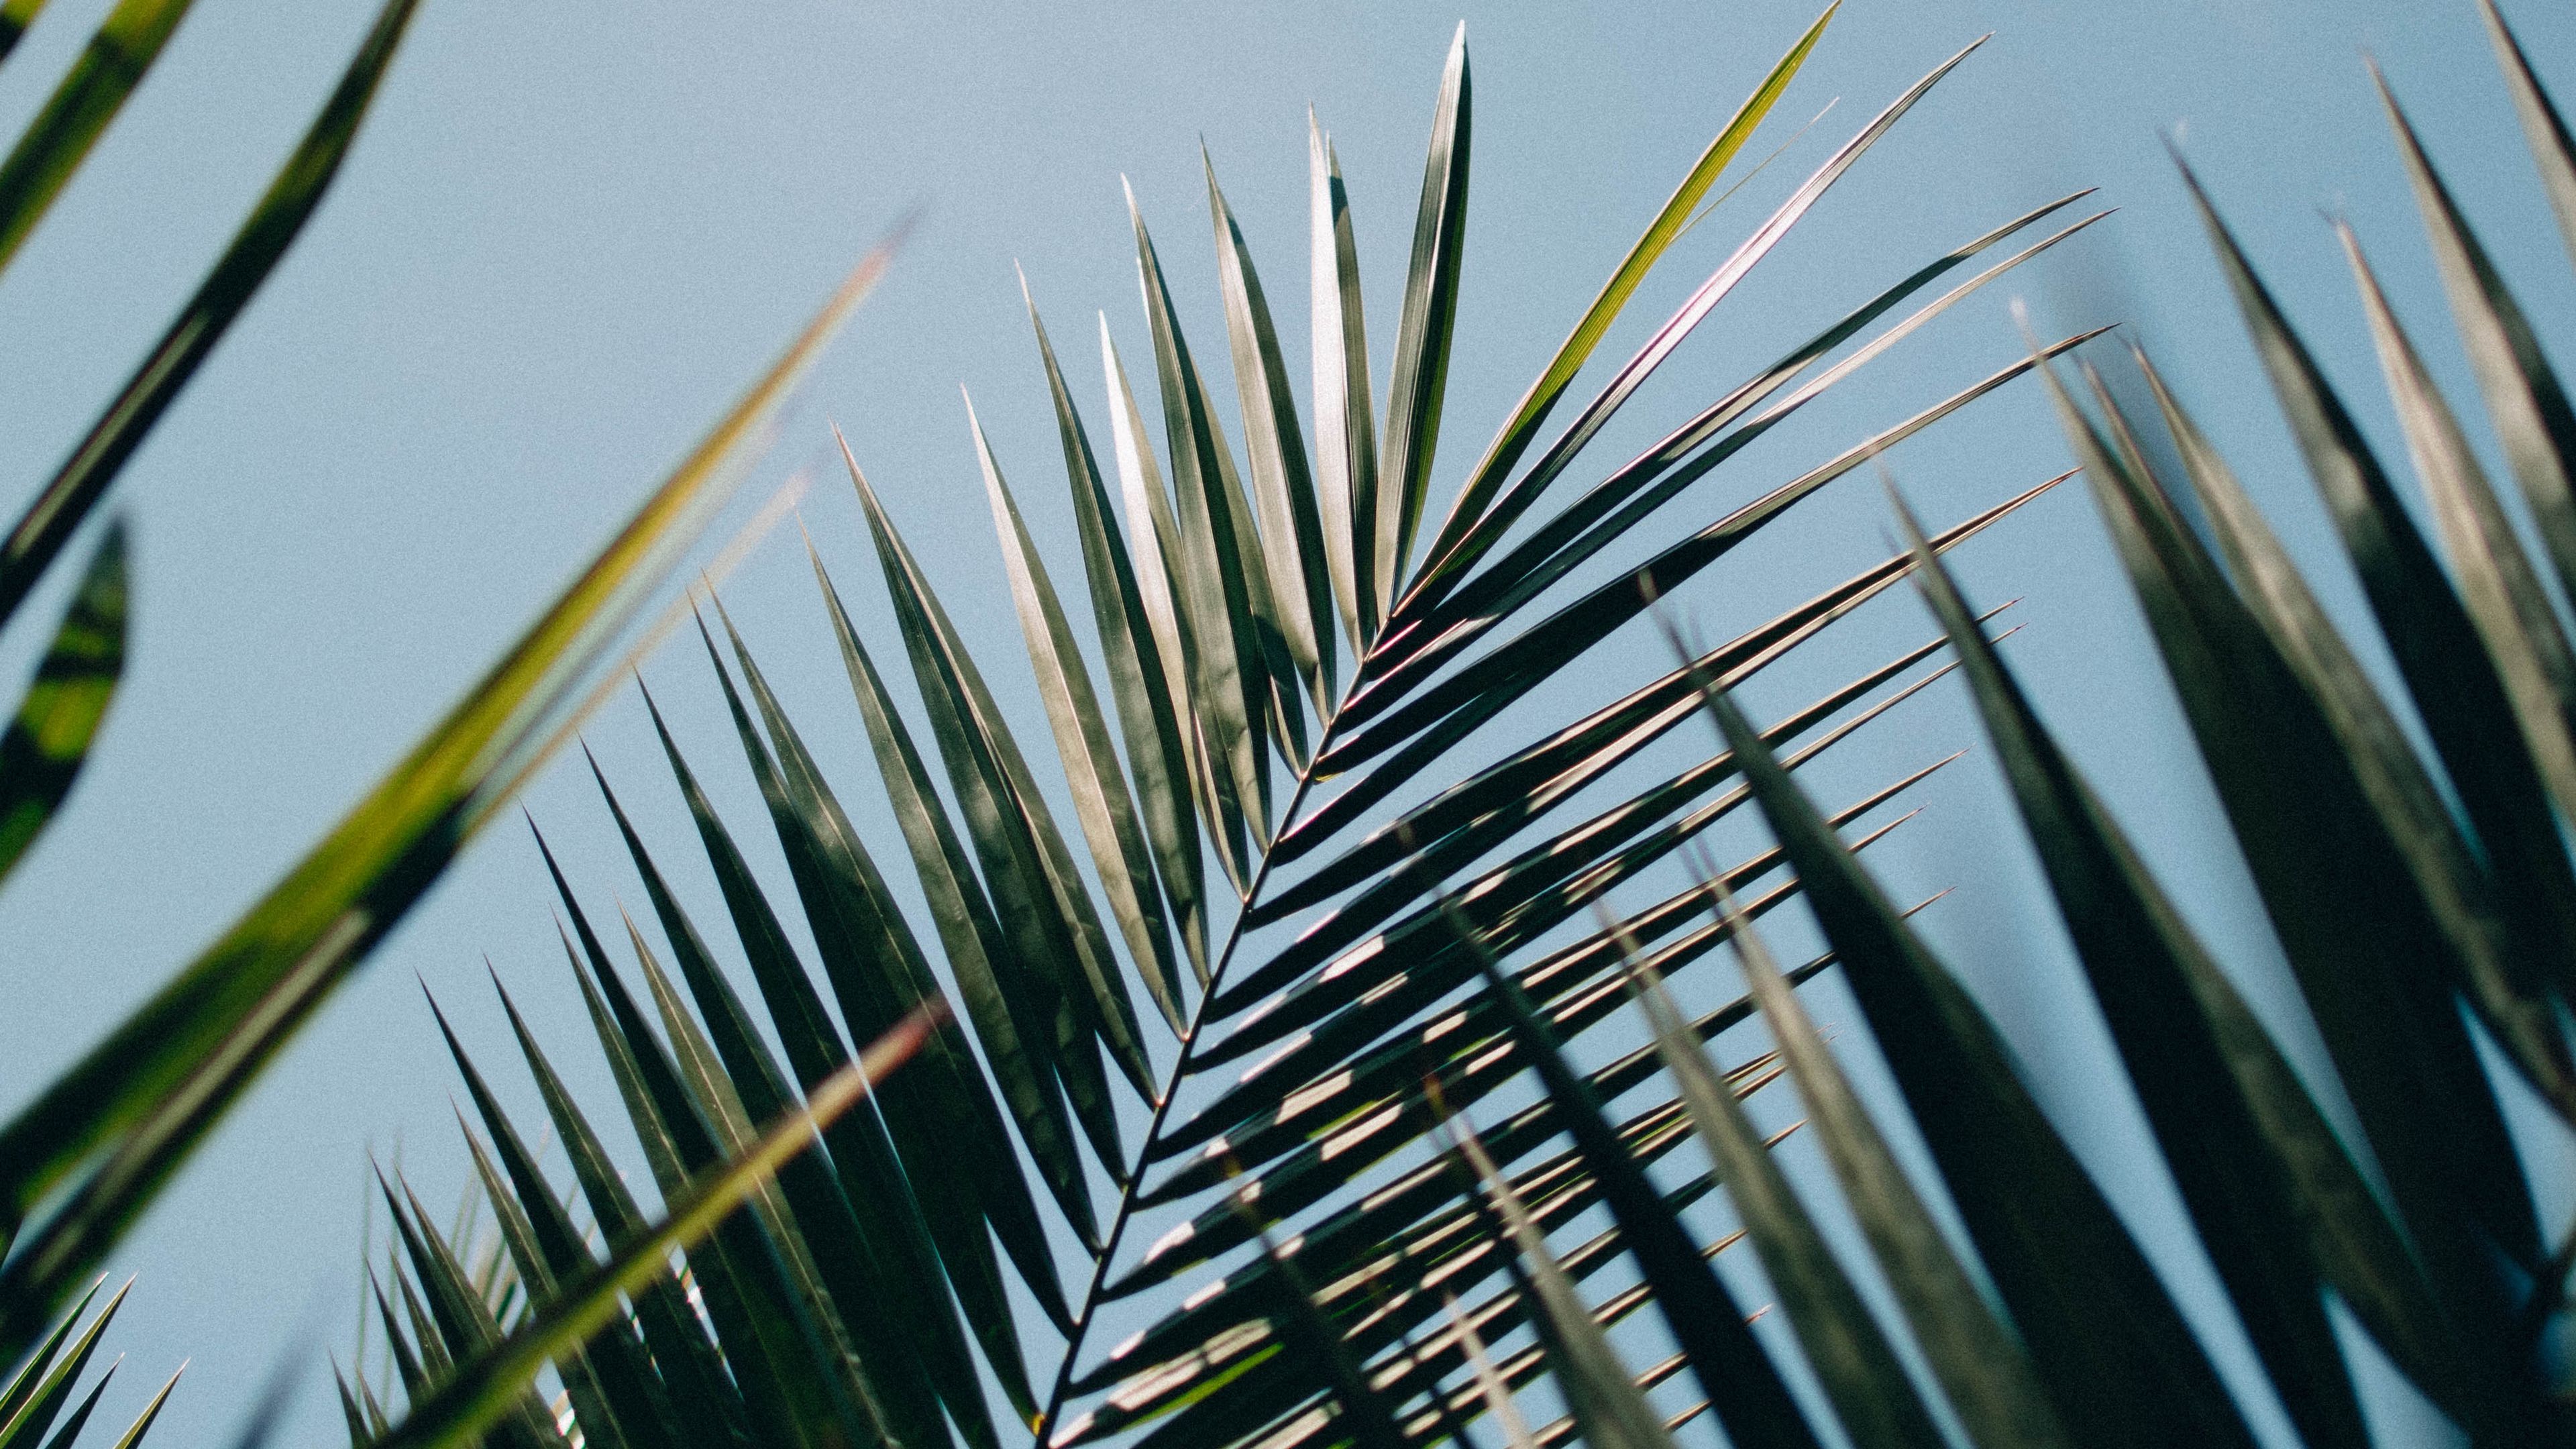 Download wallpaper 3840x2160 palm, leaves, branches, plant, green 4k ...